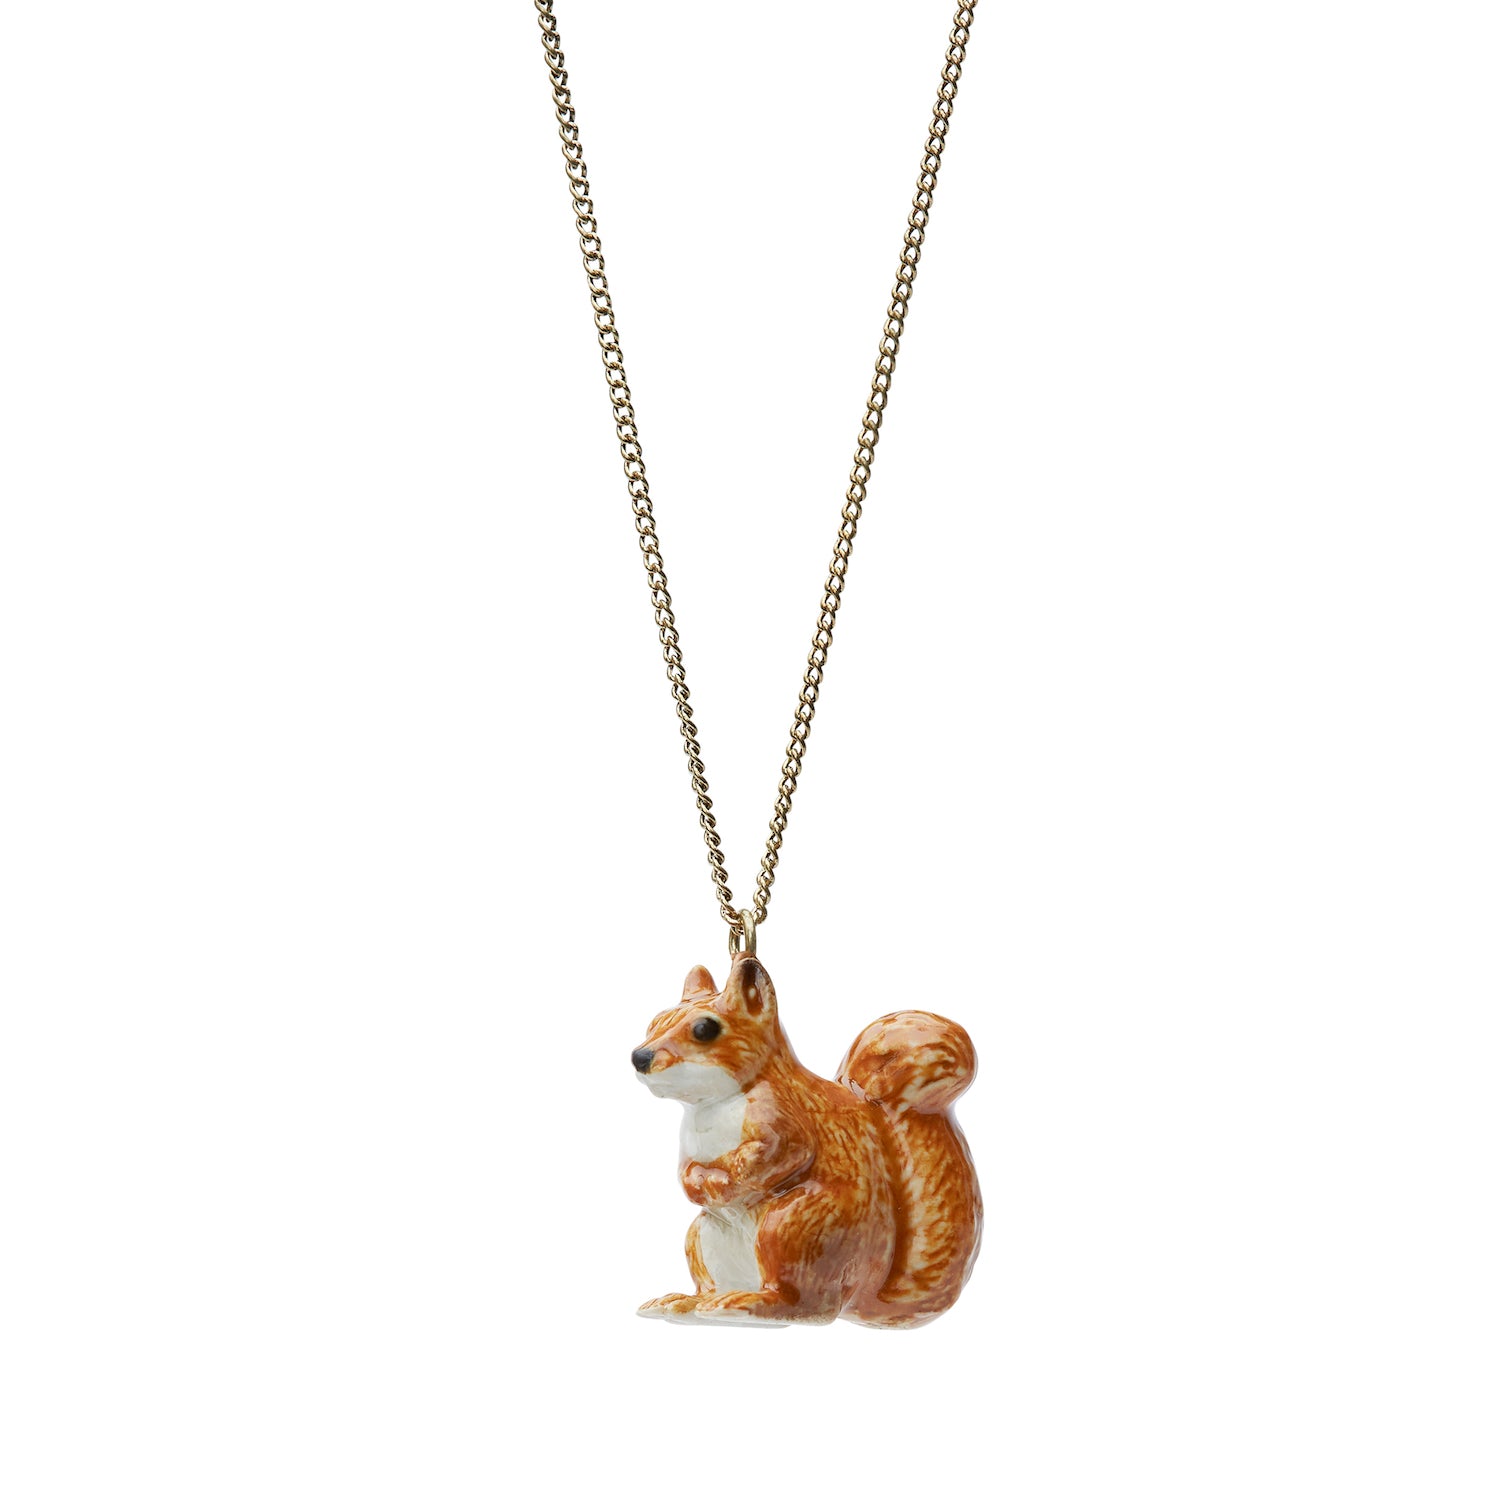 Tiny Standing Squirrel Necklace